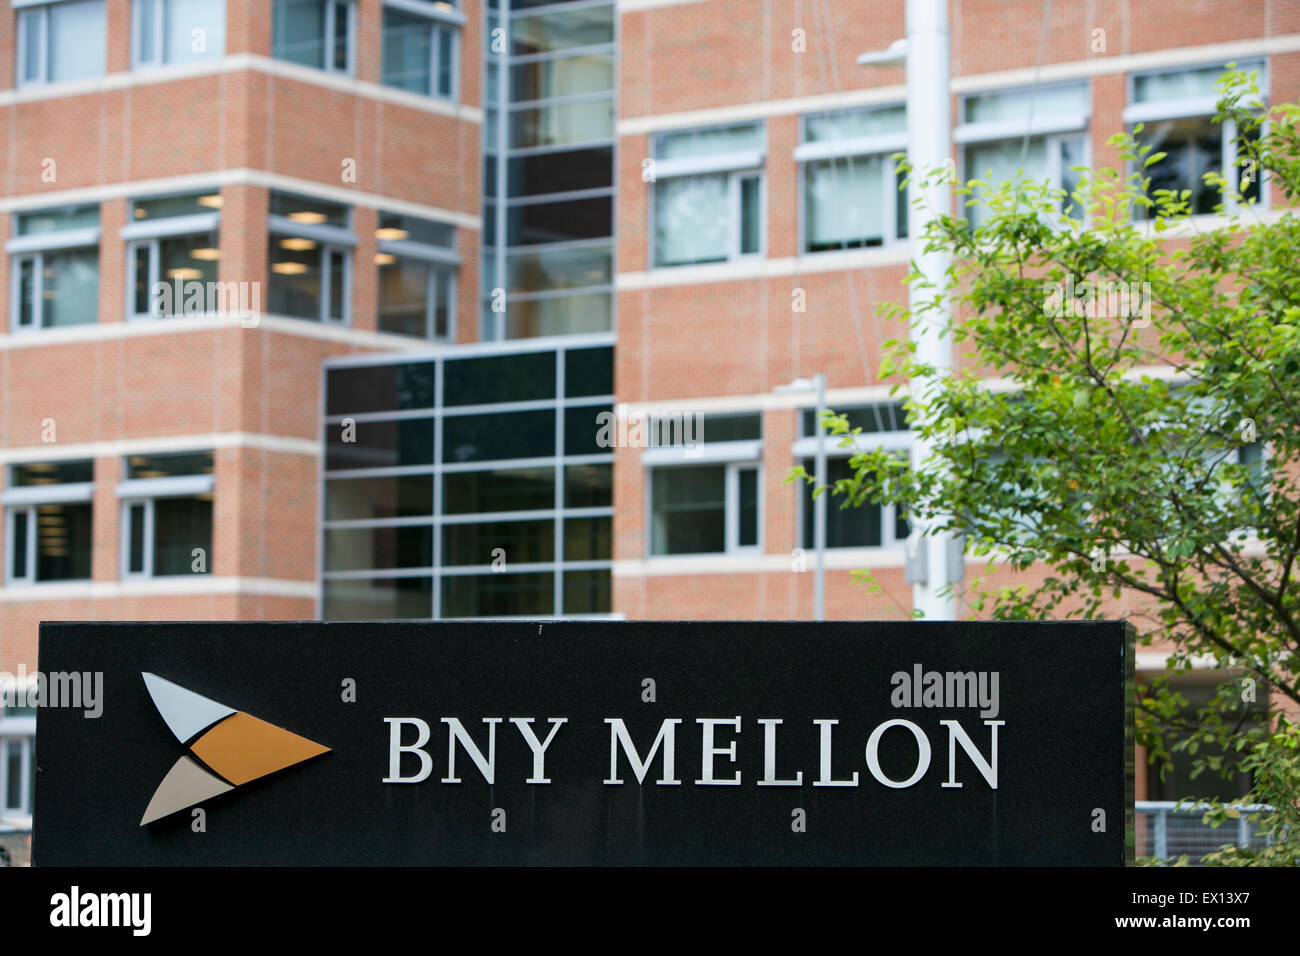 Bank Of New York Mellon Plans To Move Its Corporate Headquarters